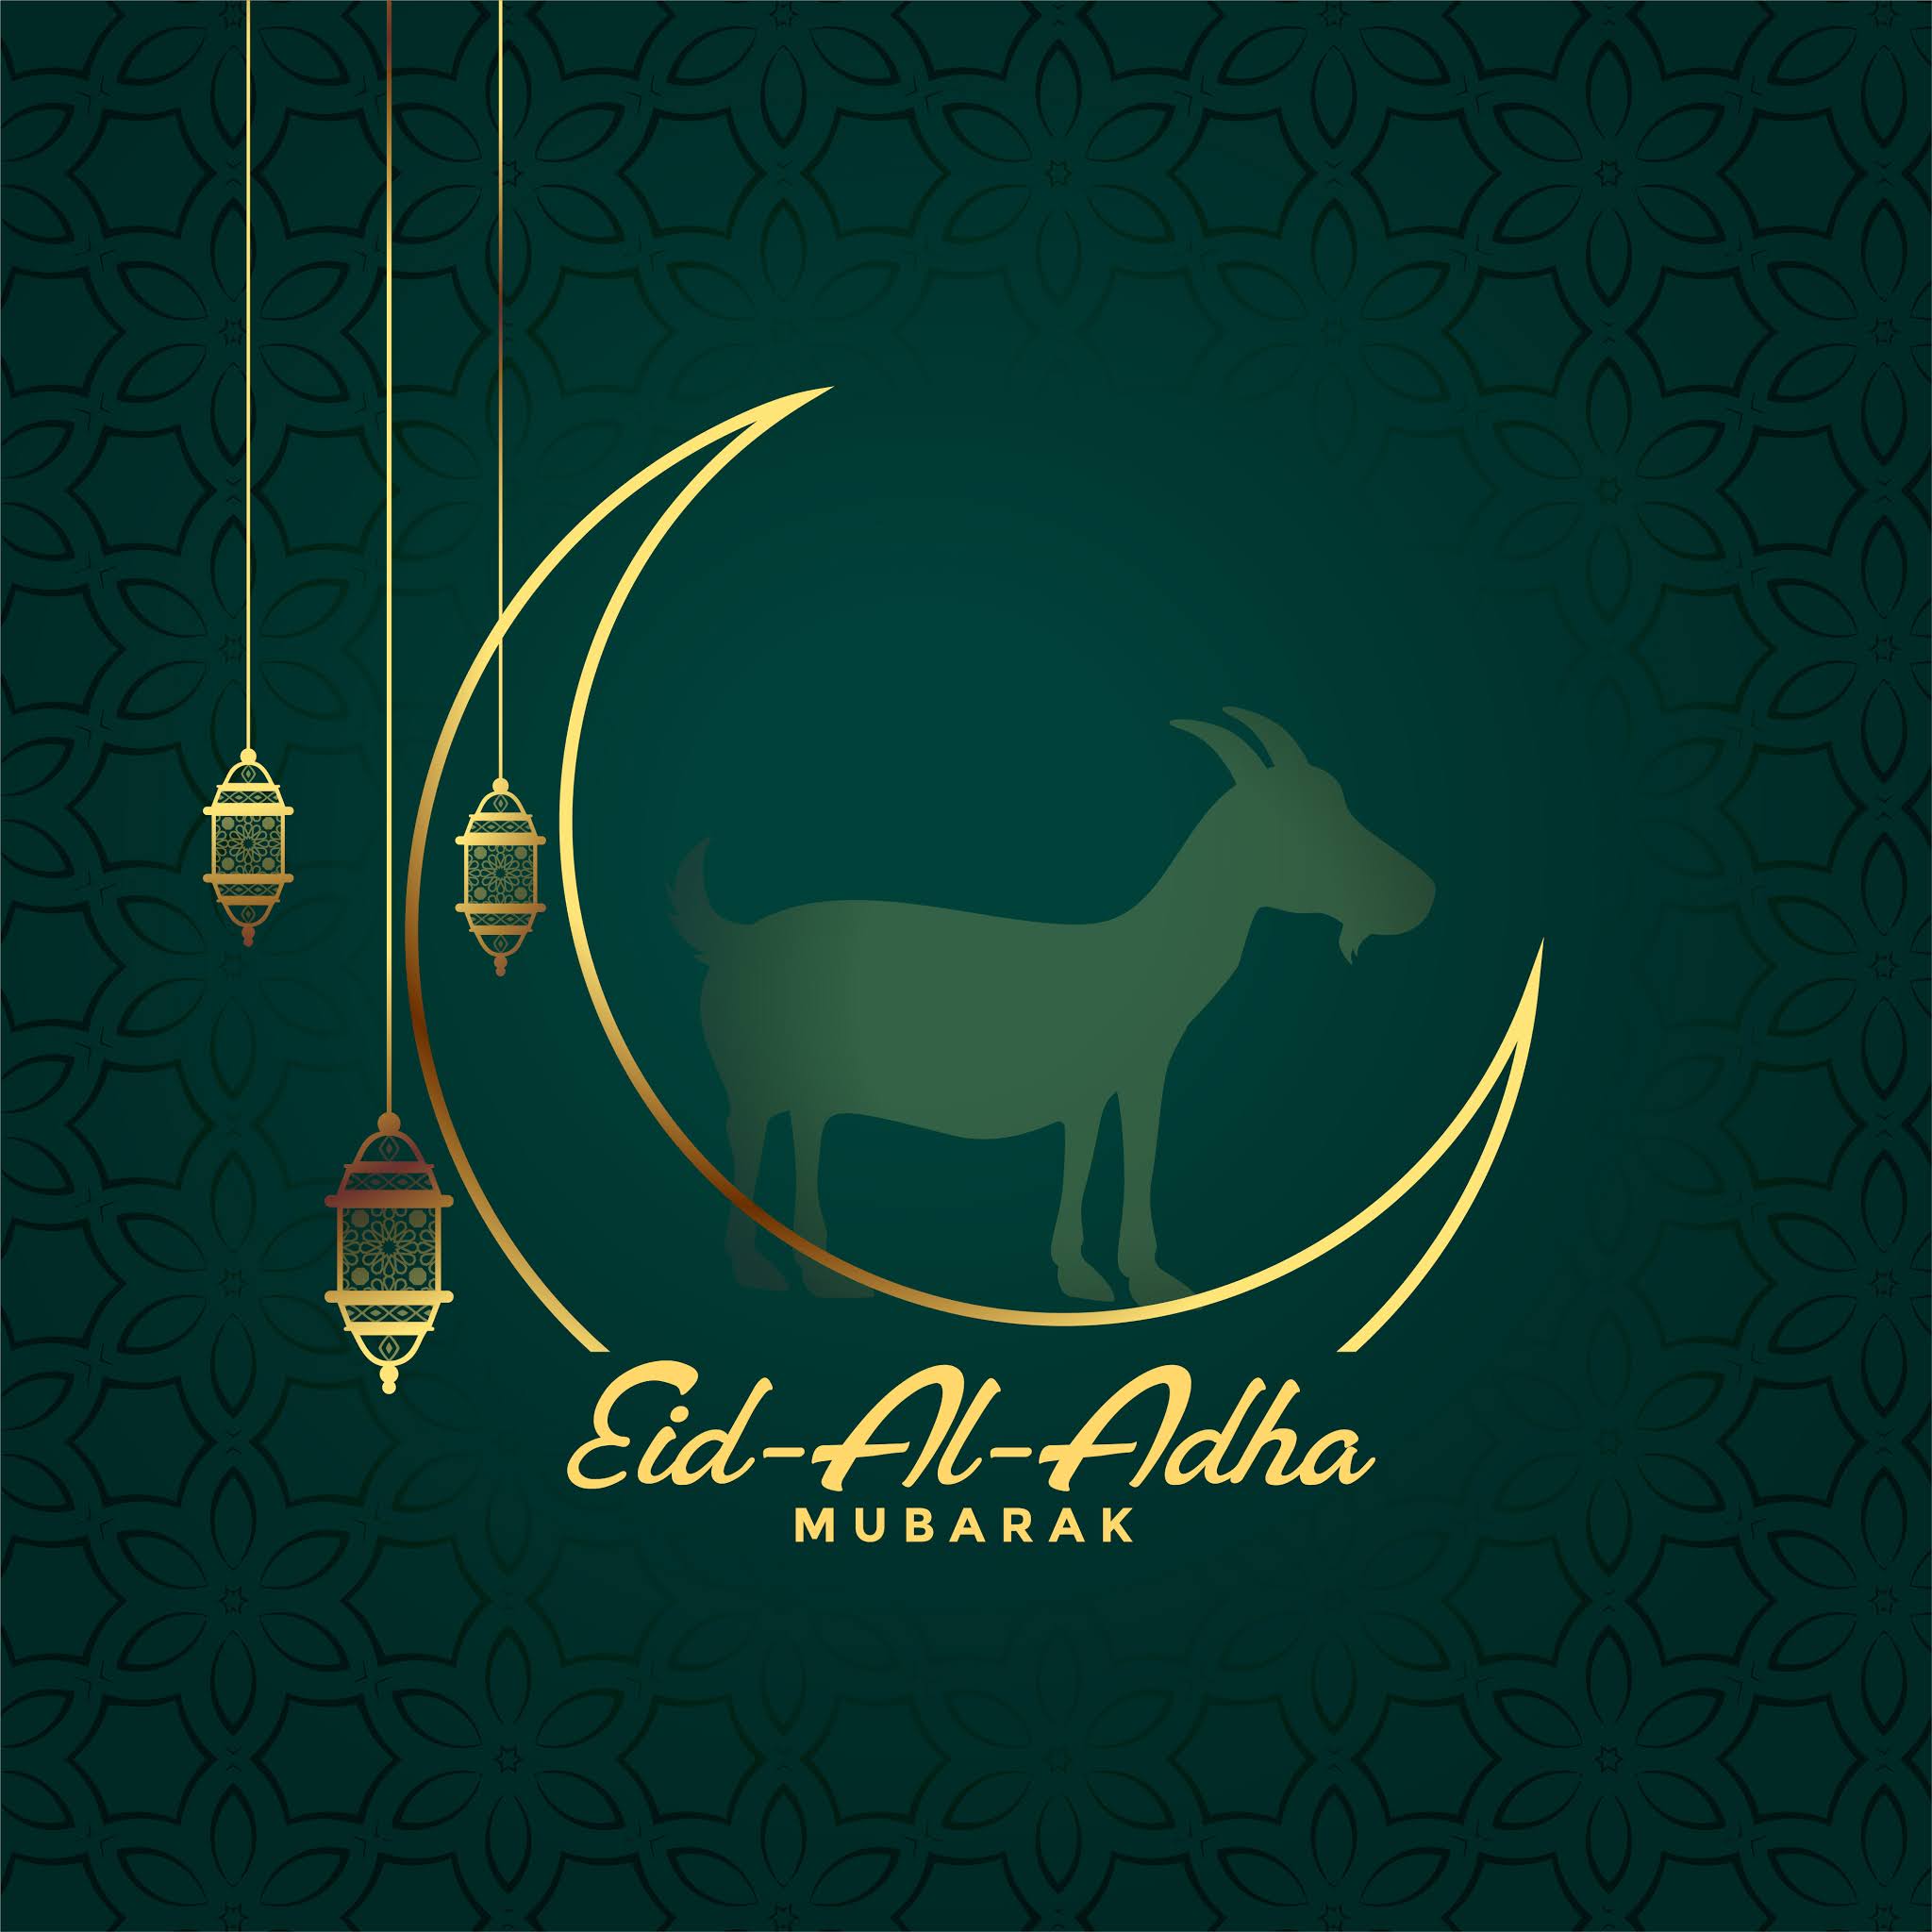 Eid Ul Fitr And Eid Ul Adha What Is The Differenceaid - Mobile Legends